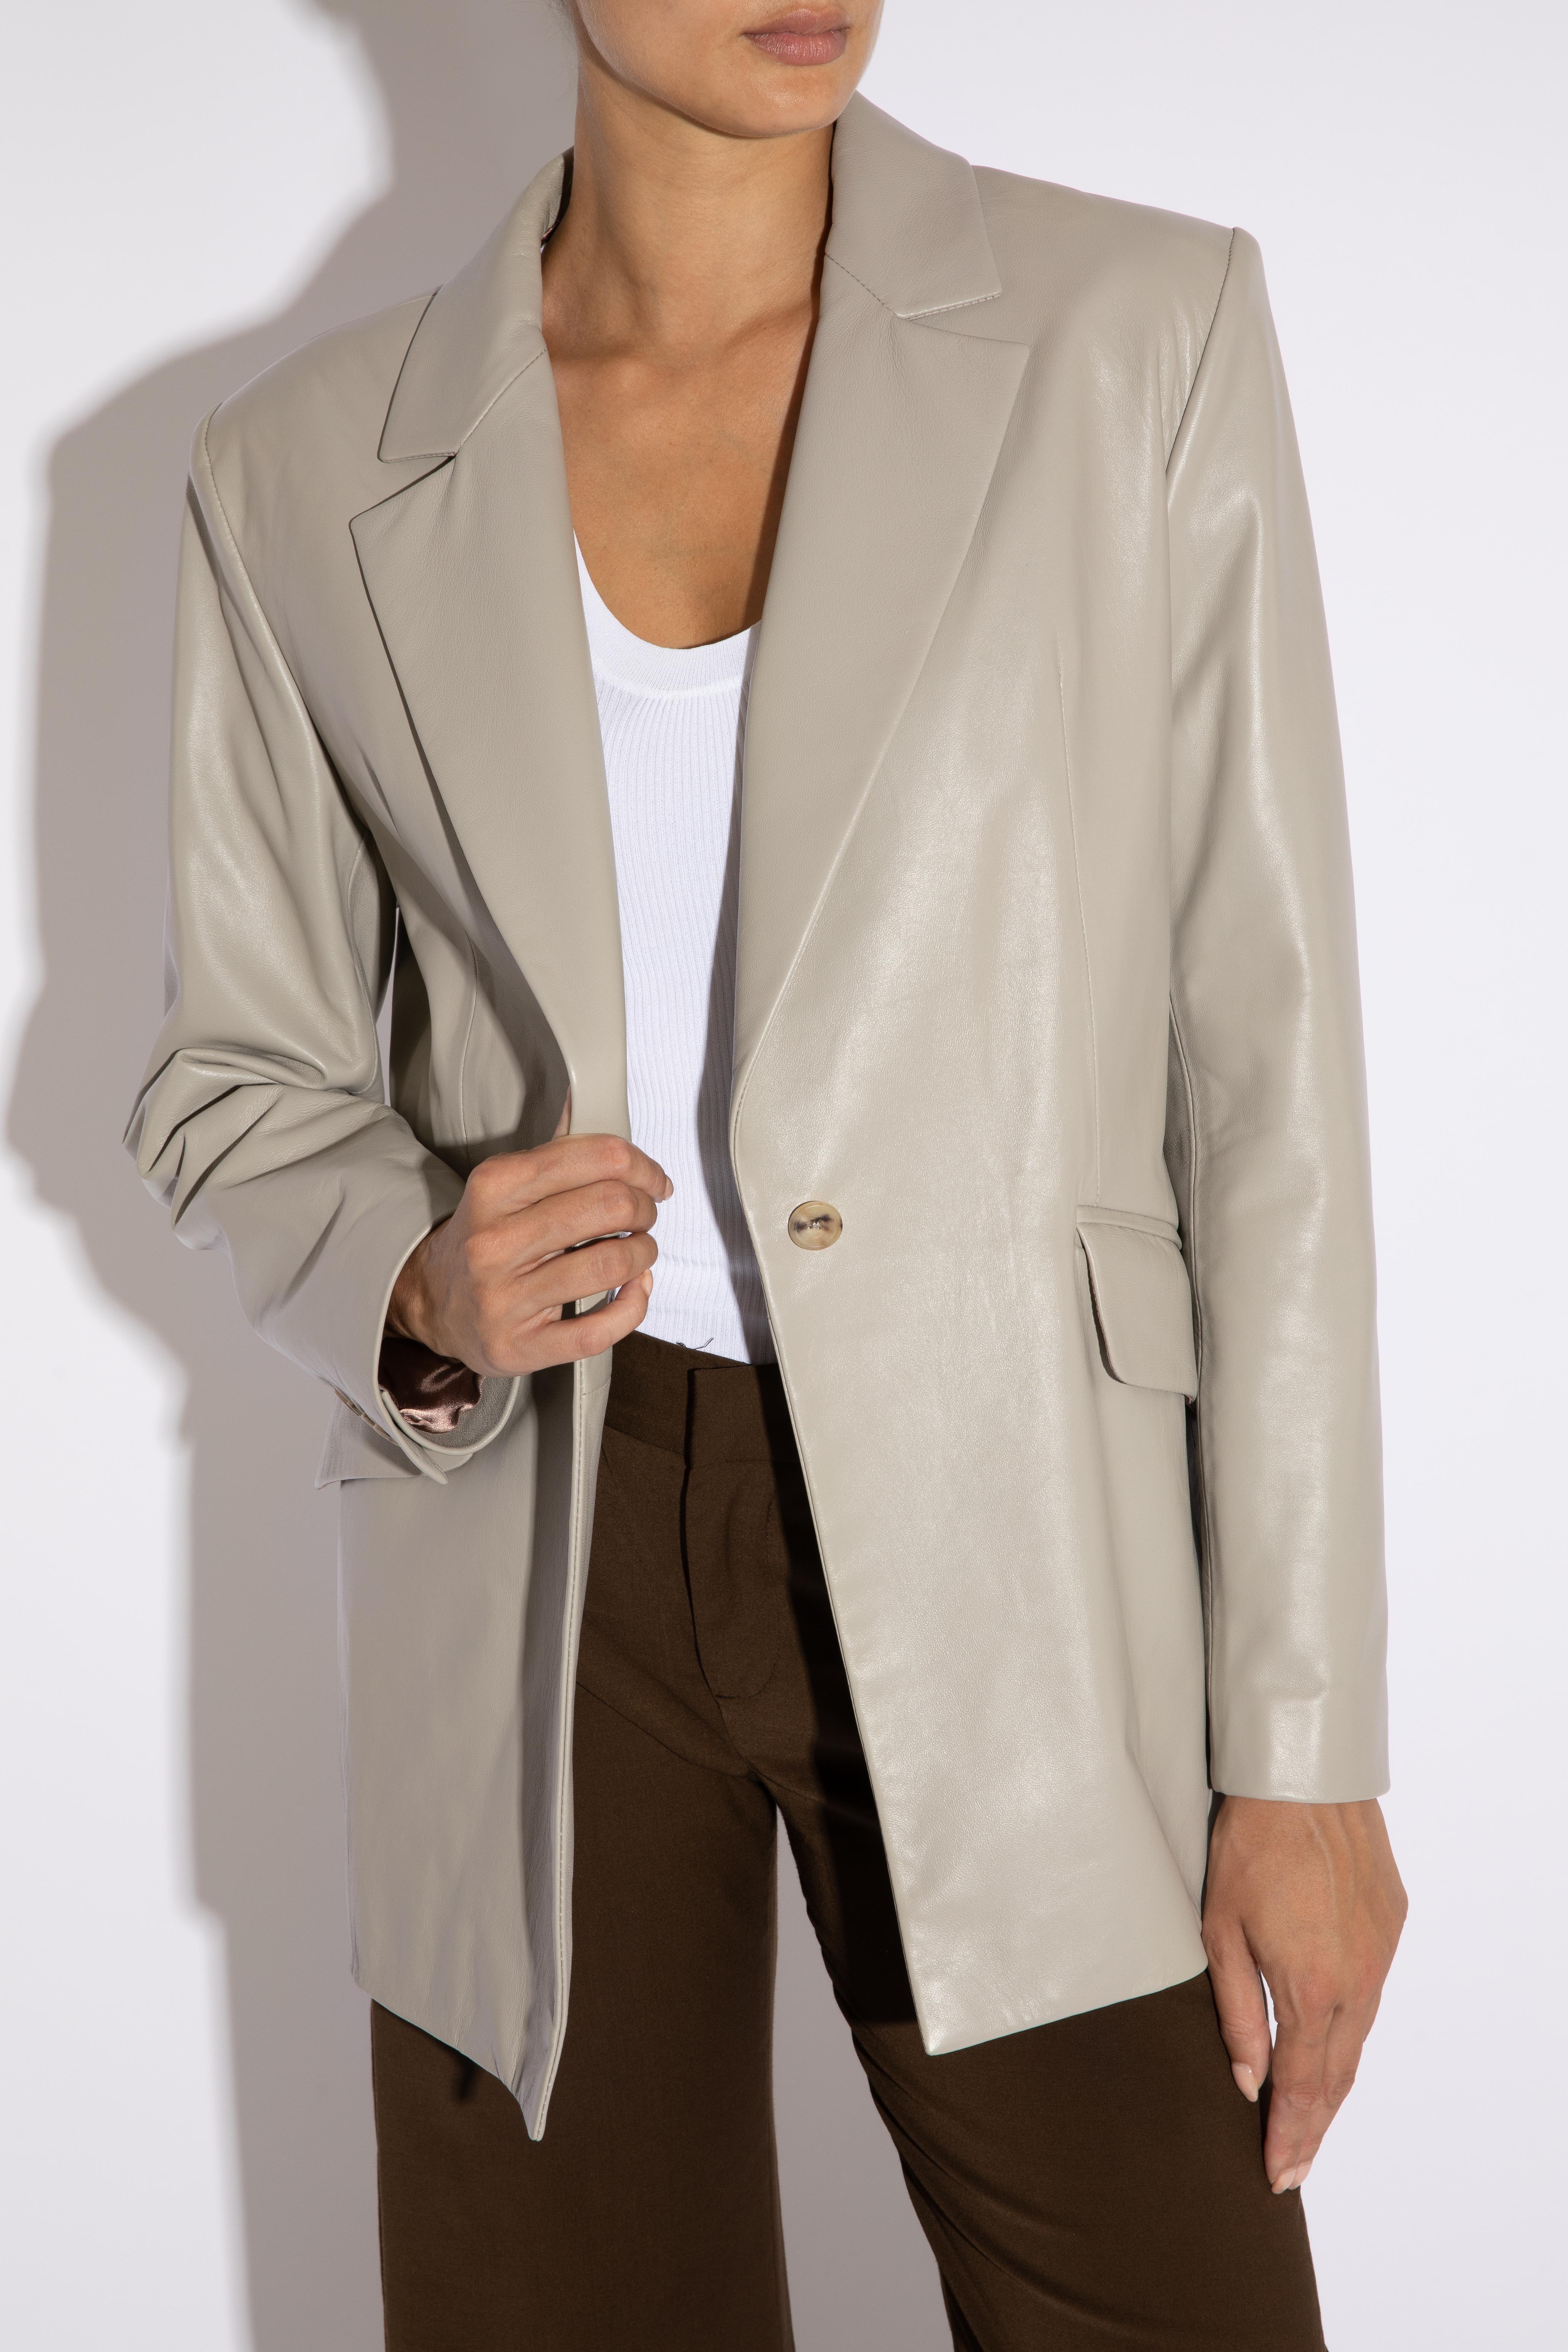 Verheyen London Chesca Oversize Blazer in Stone Grey Leather, Size 12

Handmade in London, made with lamb leather this luxury item is an investment piece to wear for a lifetime.  Made with an oversize fit, its ideal for wearing with a jumper for